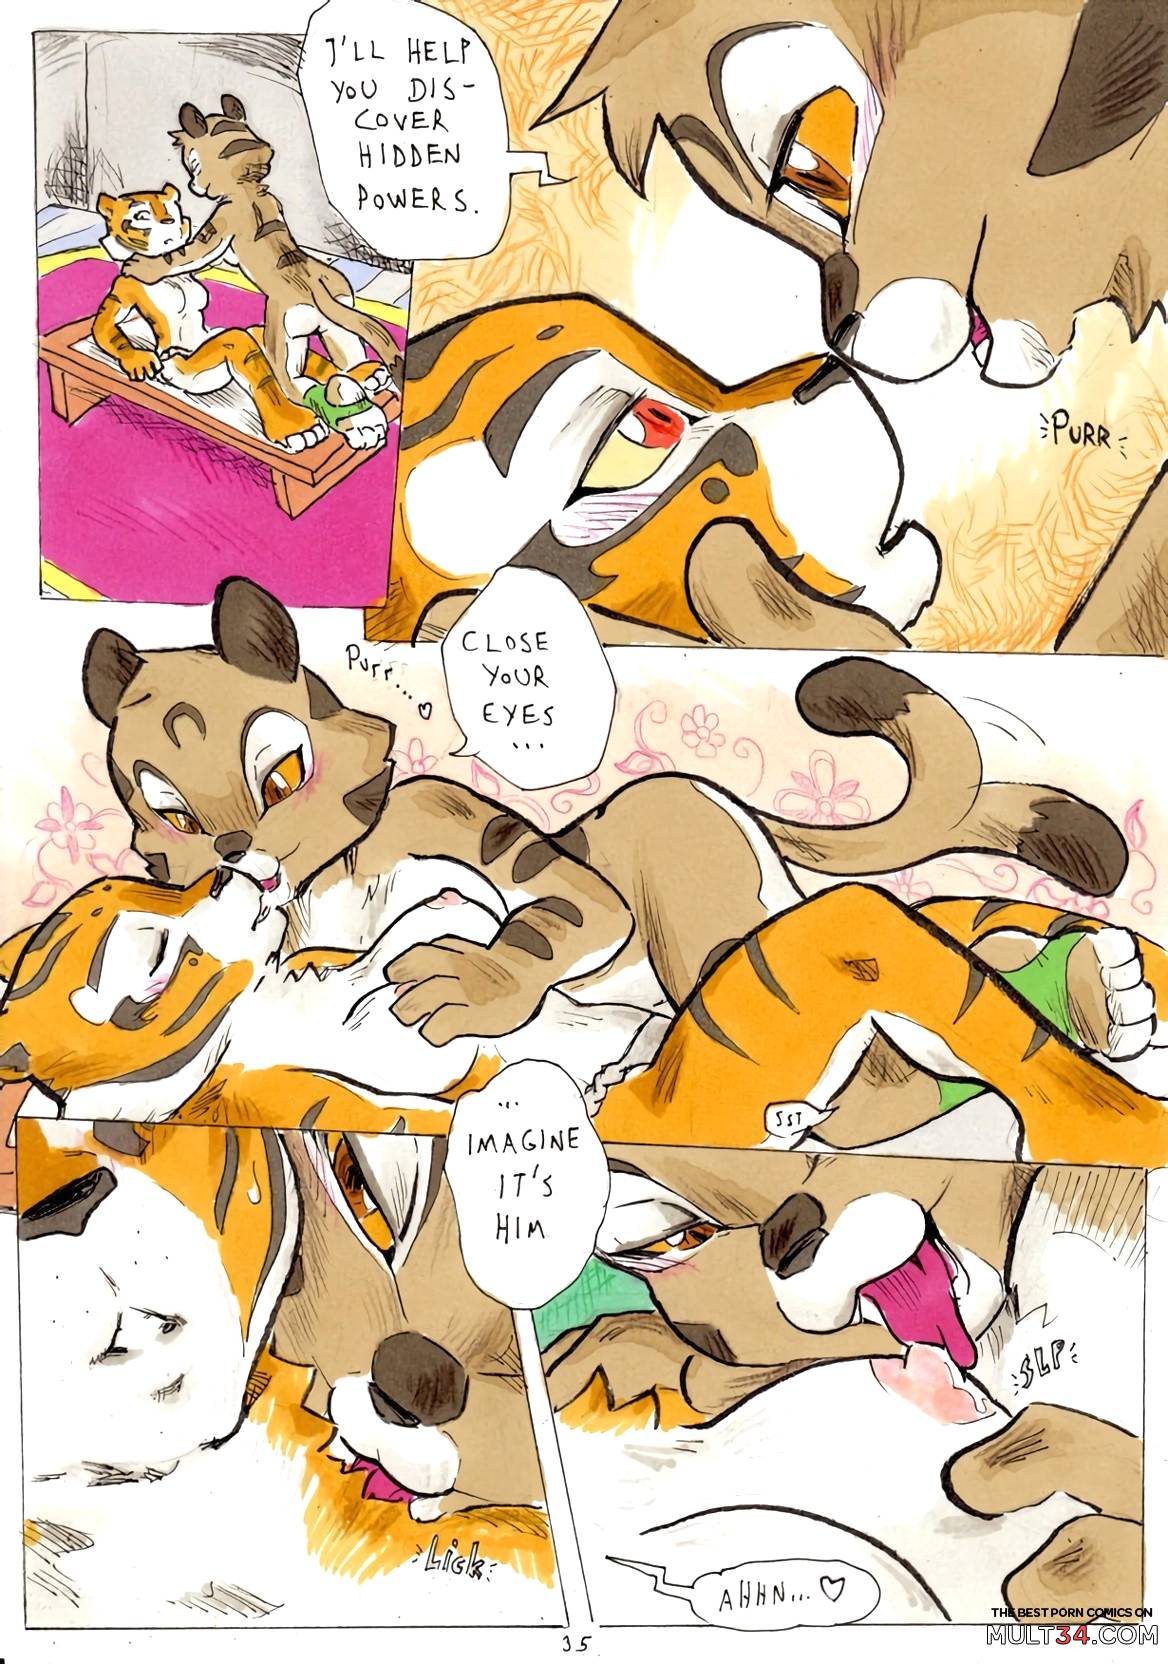 Better Late than Never 1 page 37